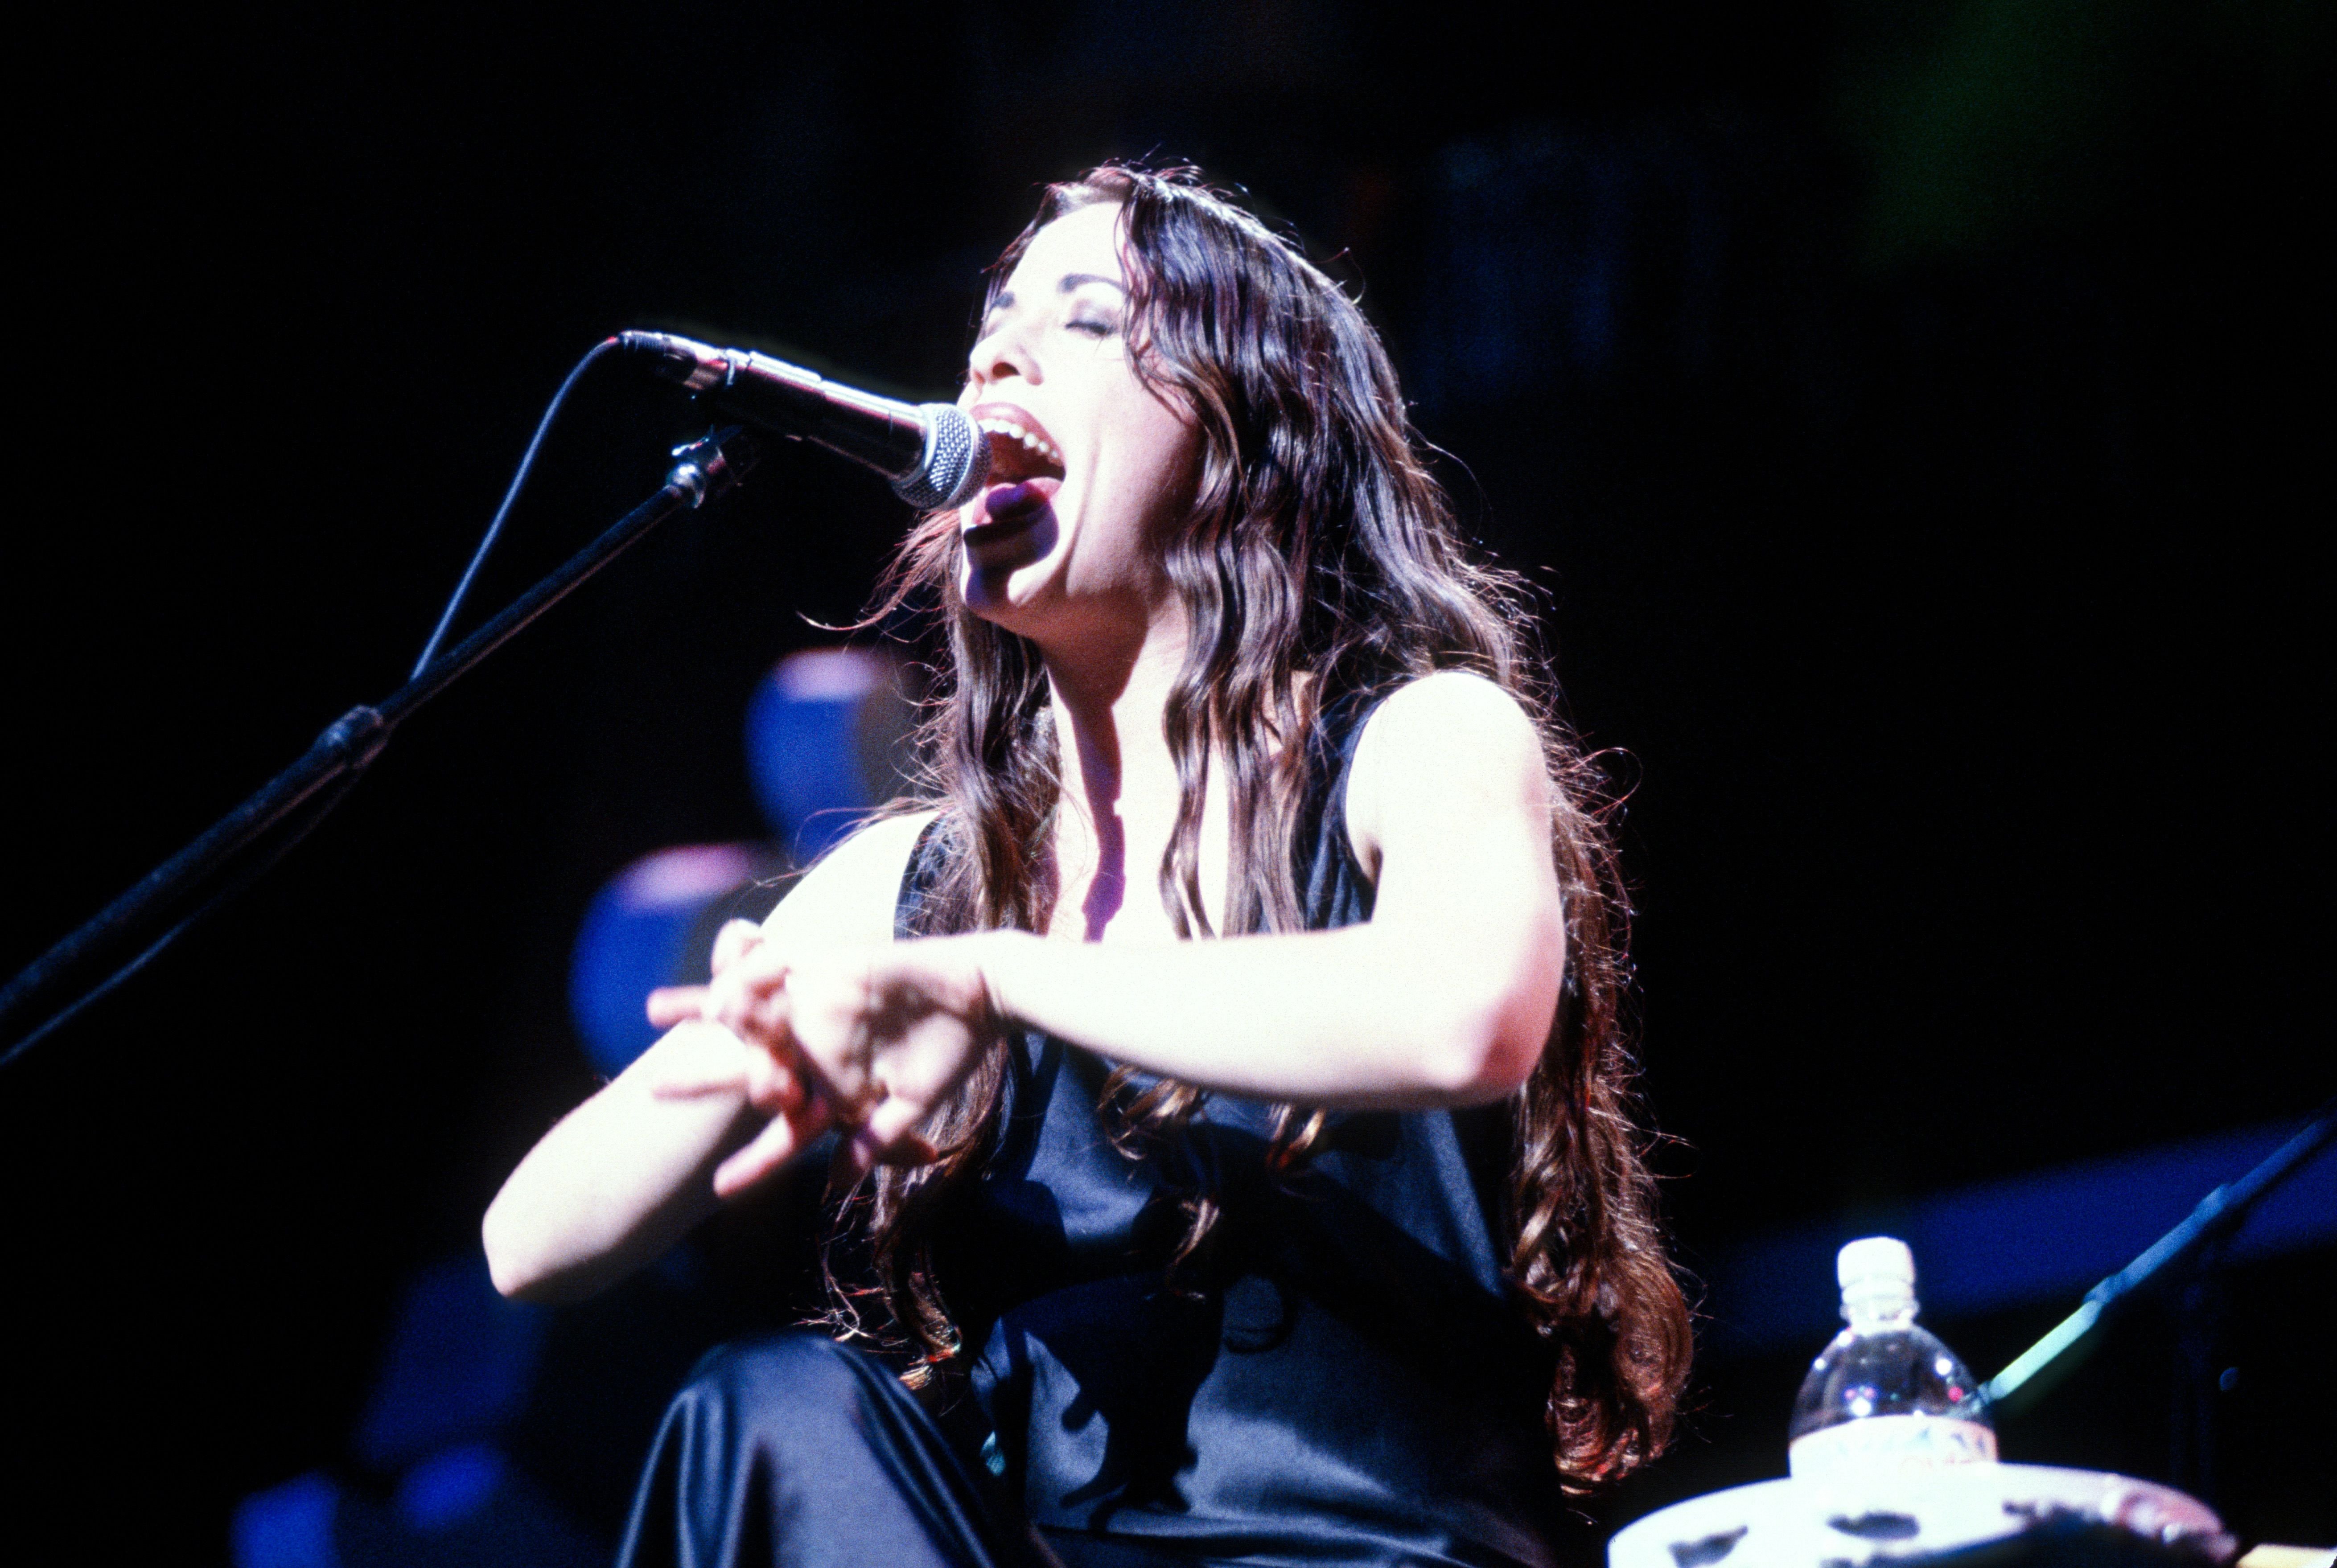 Singer/ songwriter Alanis Morissette onstage circa 1995 | Source: Getty Images